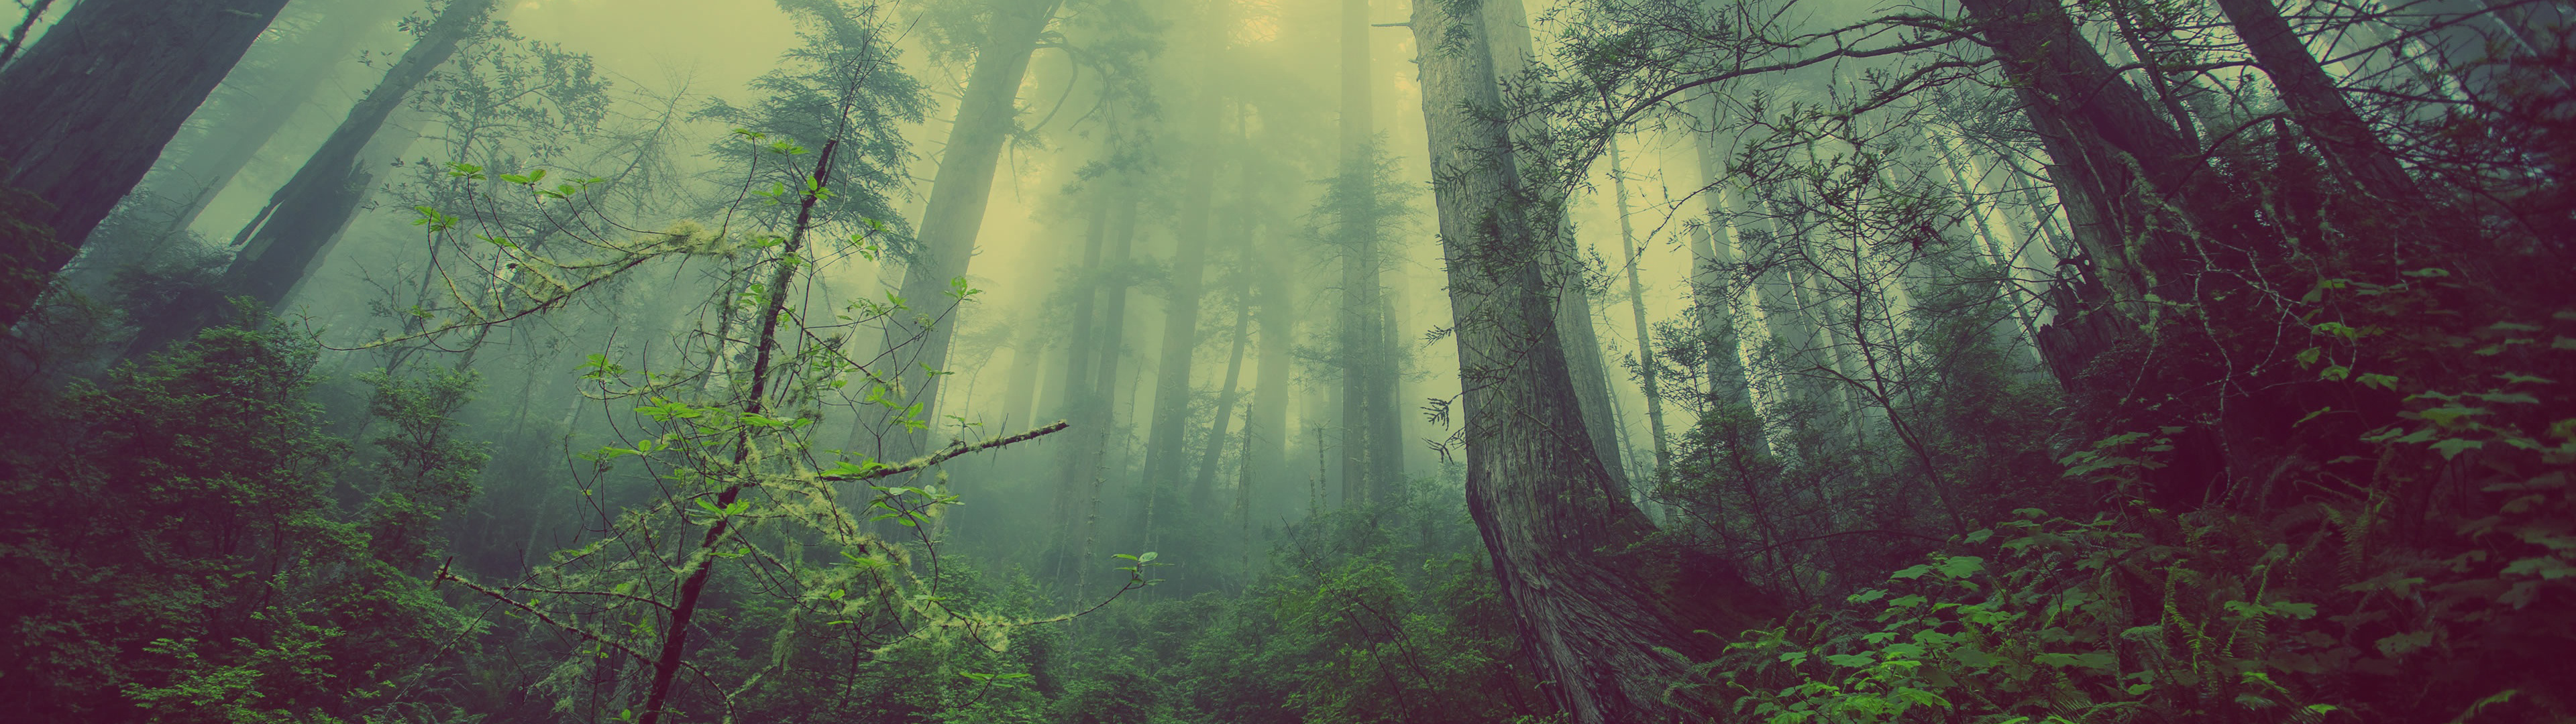 Green Forest: A complex ecological system in which trees are the dominant life-form. 3840x1080 Dual Screen Background.